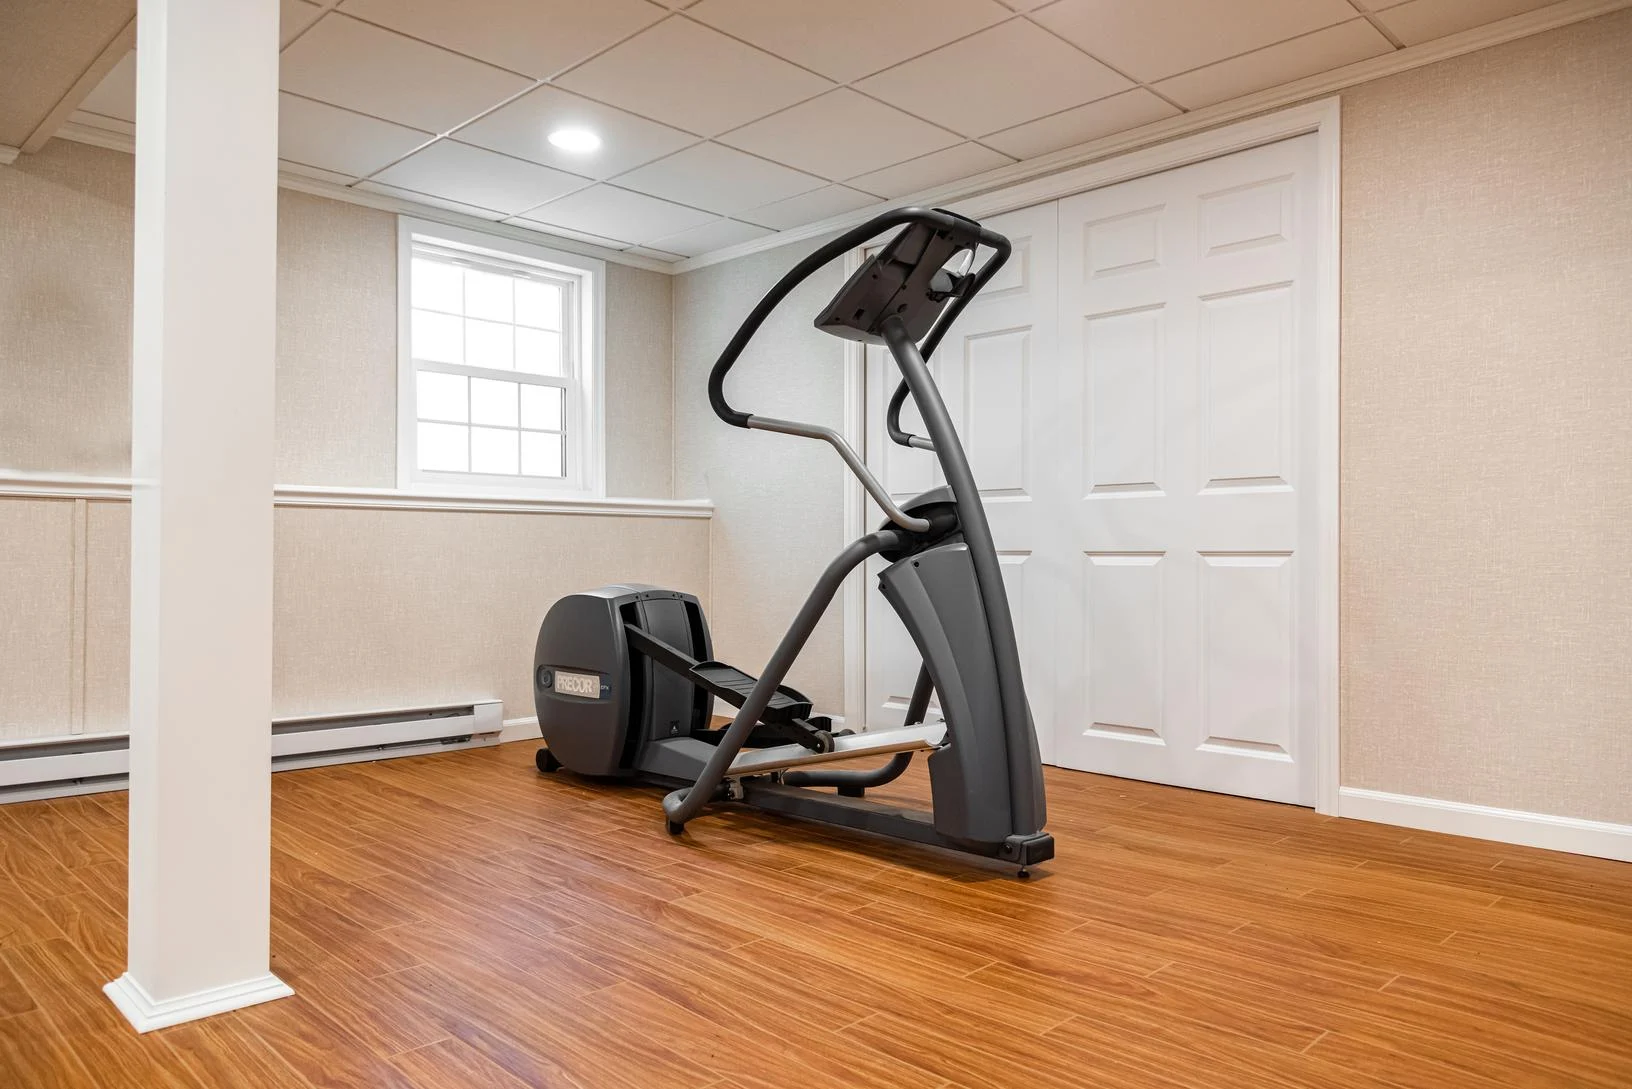 Workout at home with a basement gym in Southborough